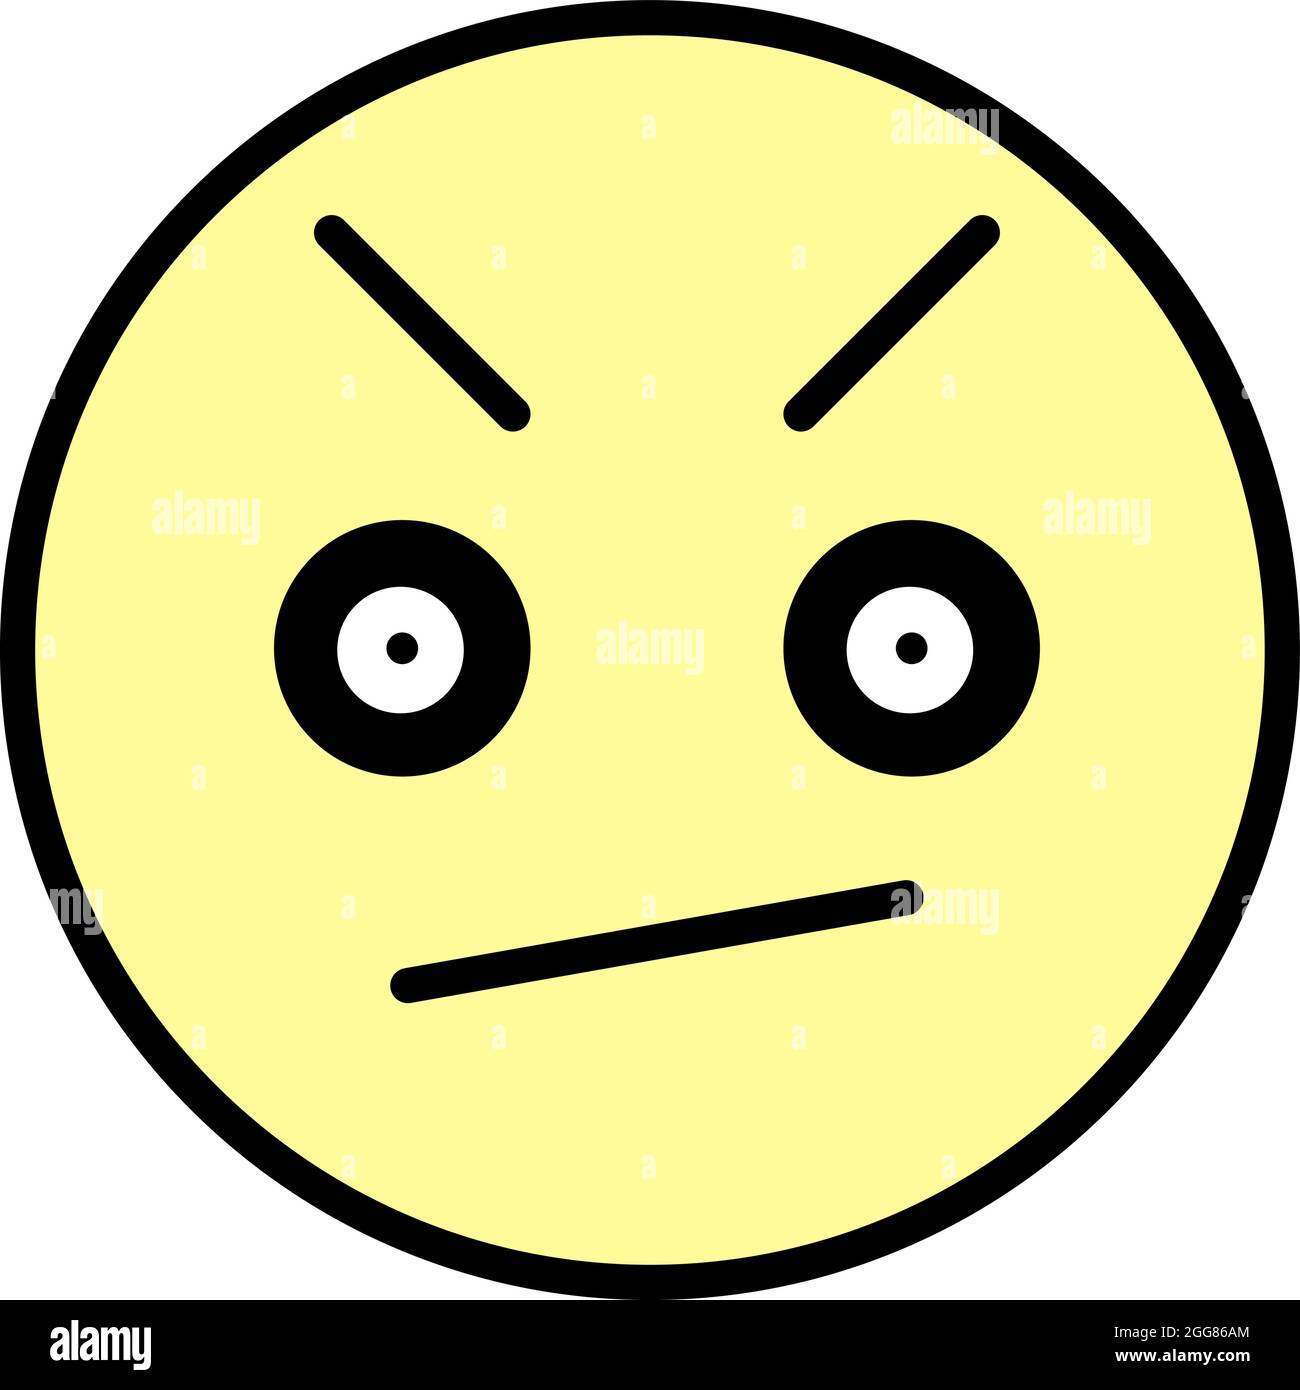 Angry emoji, illustration, on a white background. Stock Vector